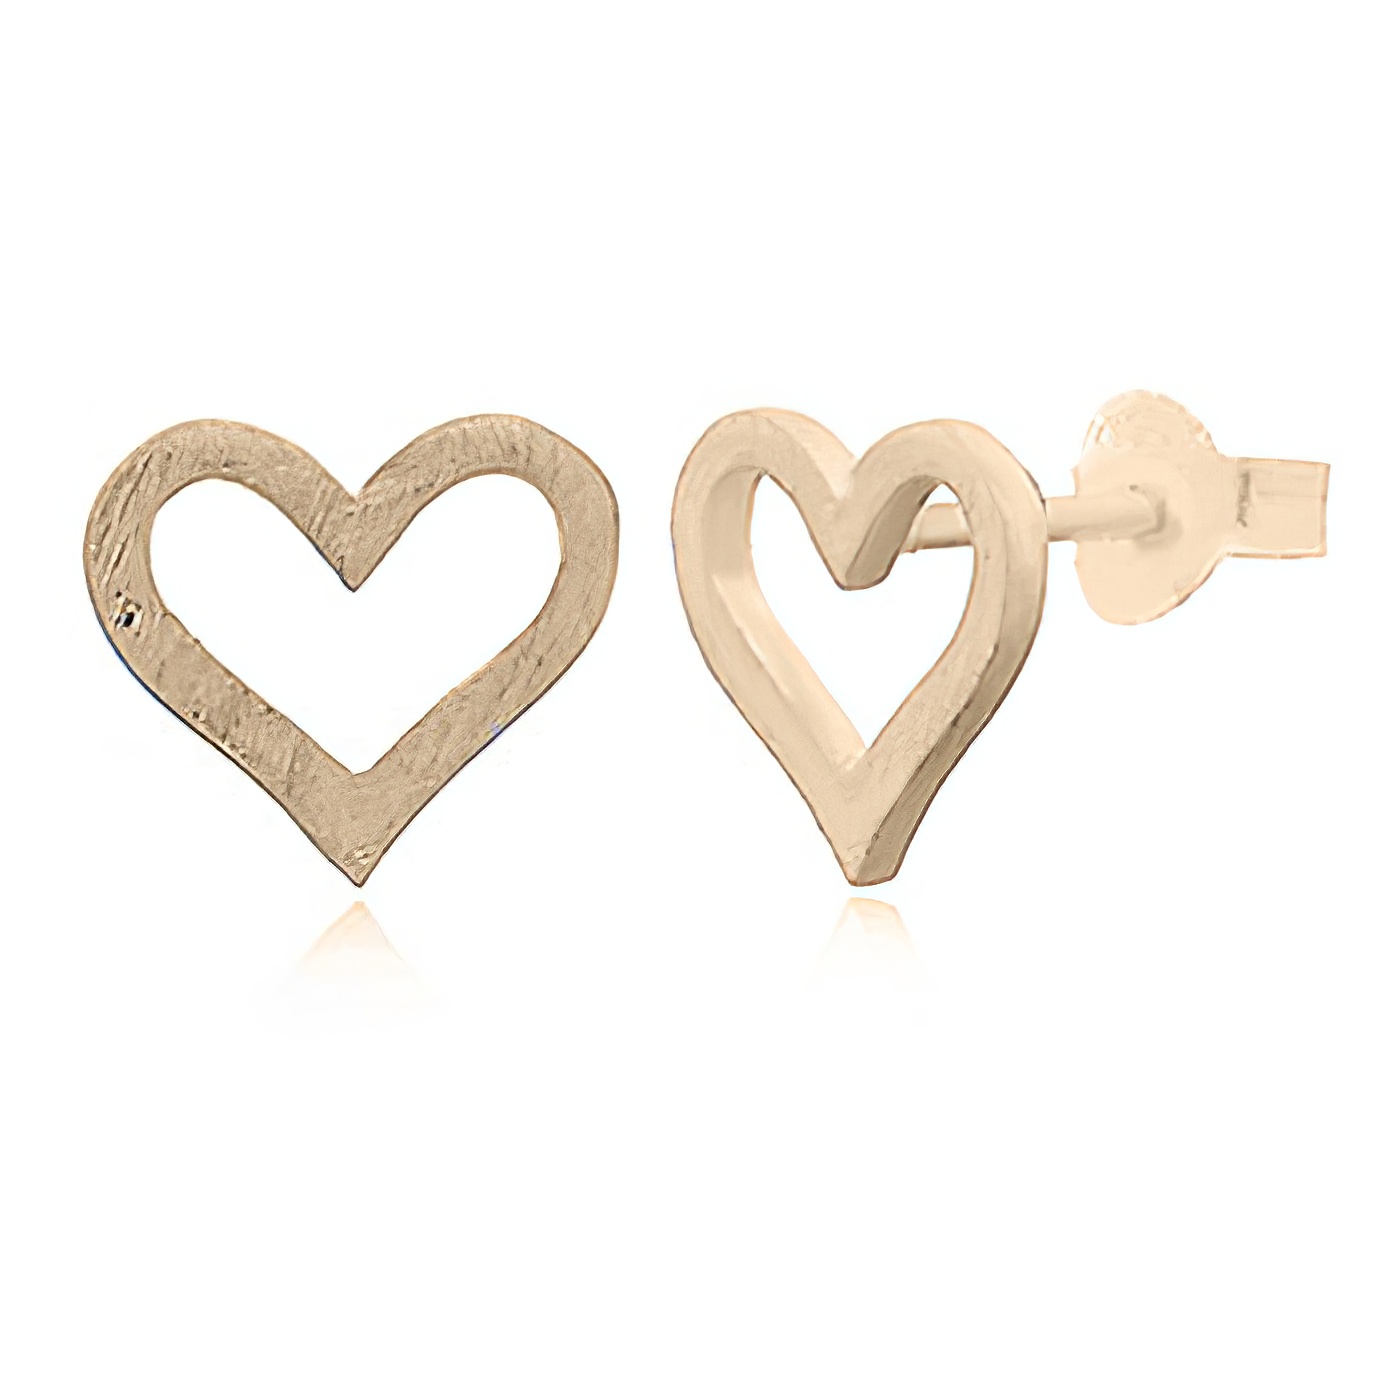 Brushed Silver Heart Earrings Gold Plated by BeYindi 